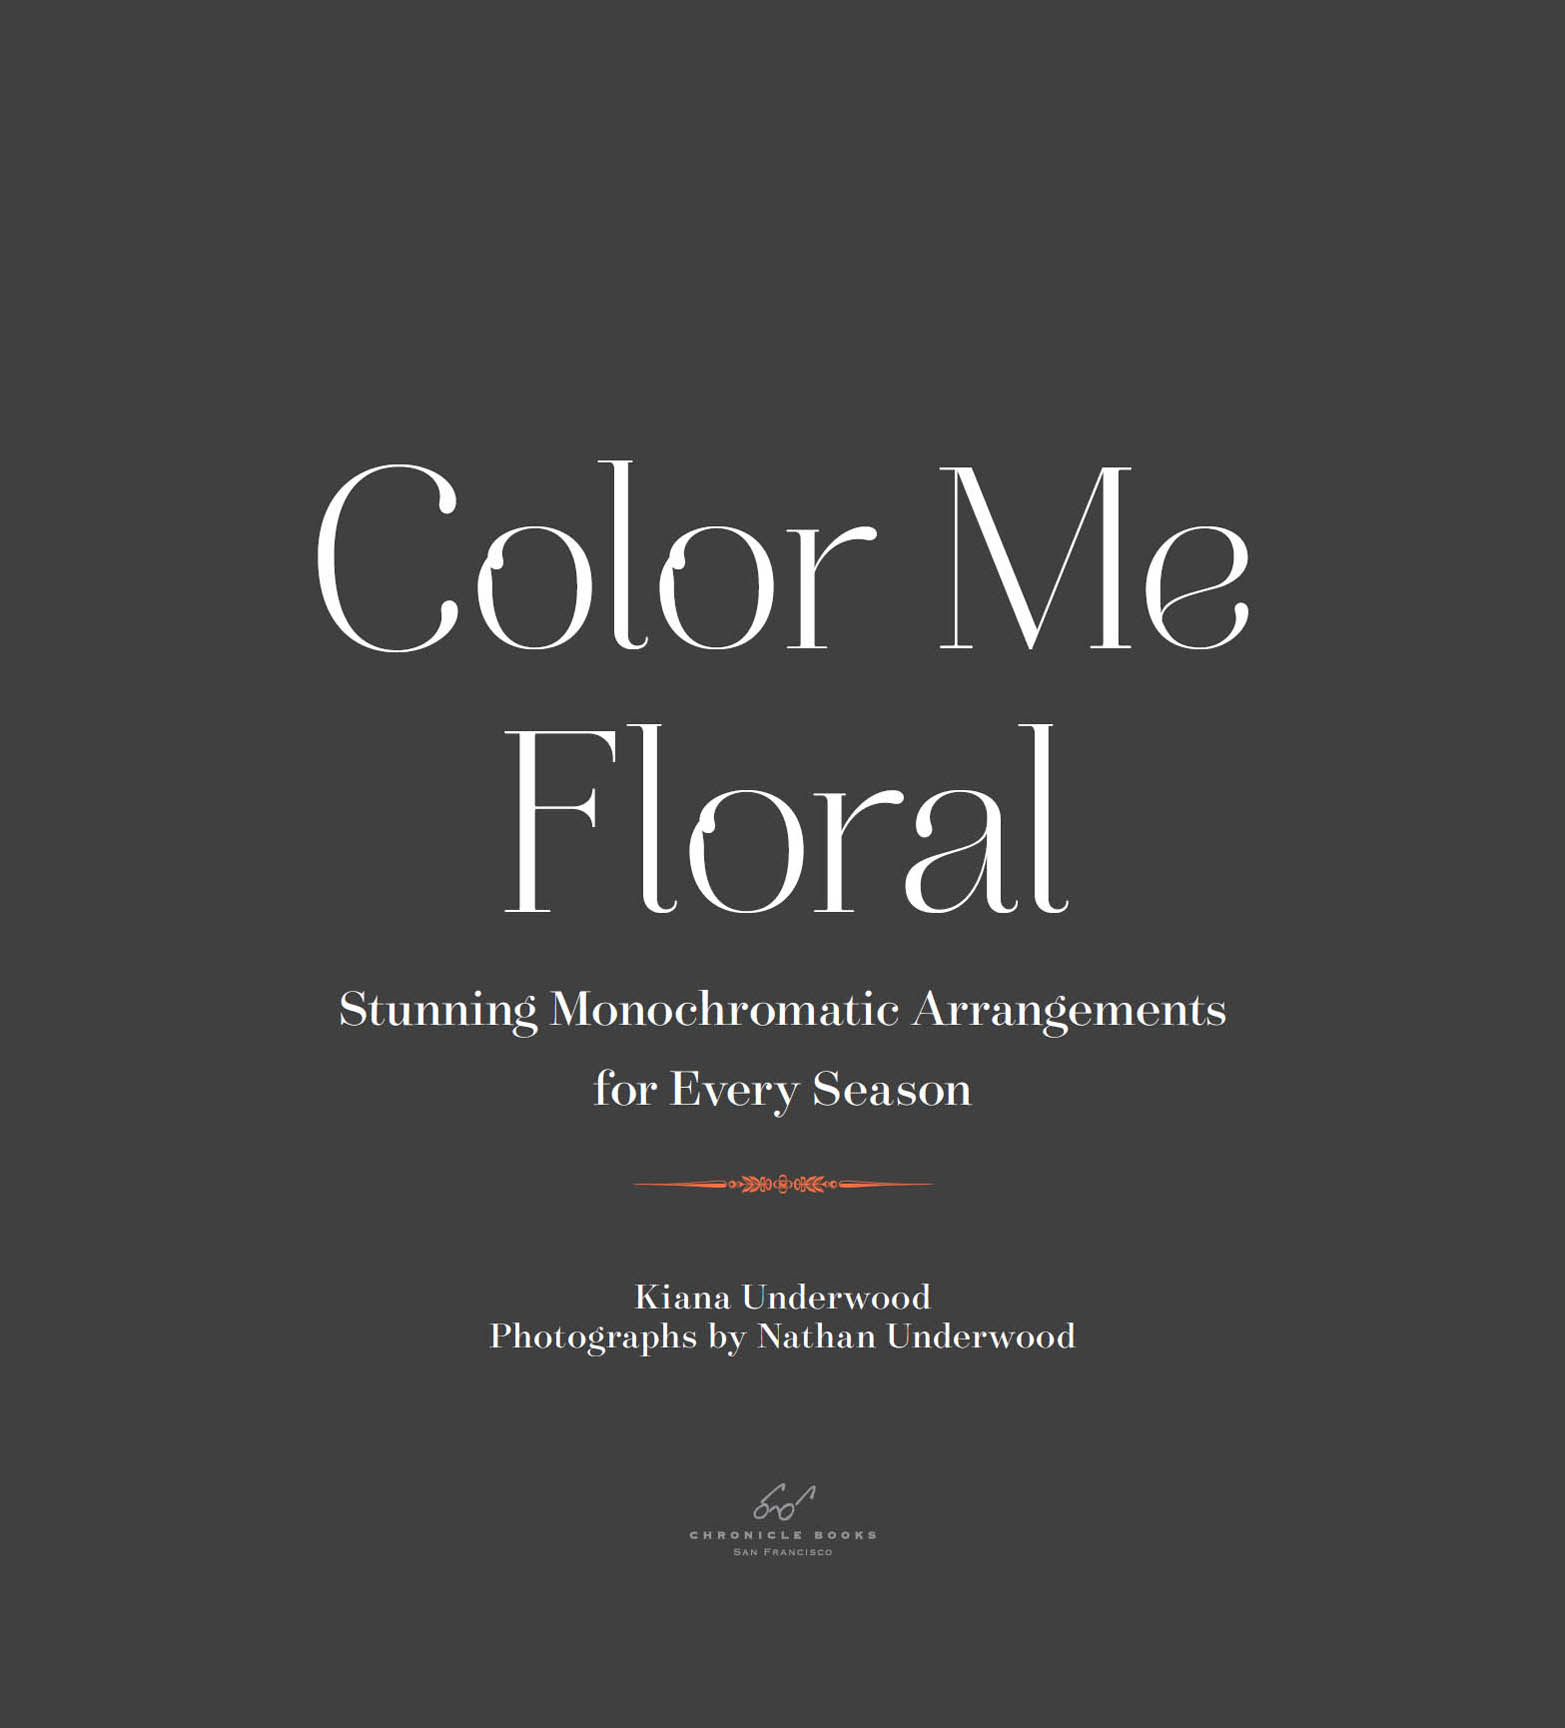 Color Me Floral Stunning Monochromatic Arrangements for Every Season - image 4